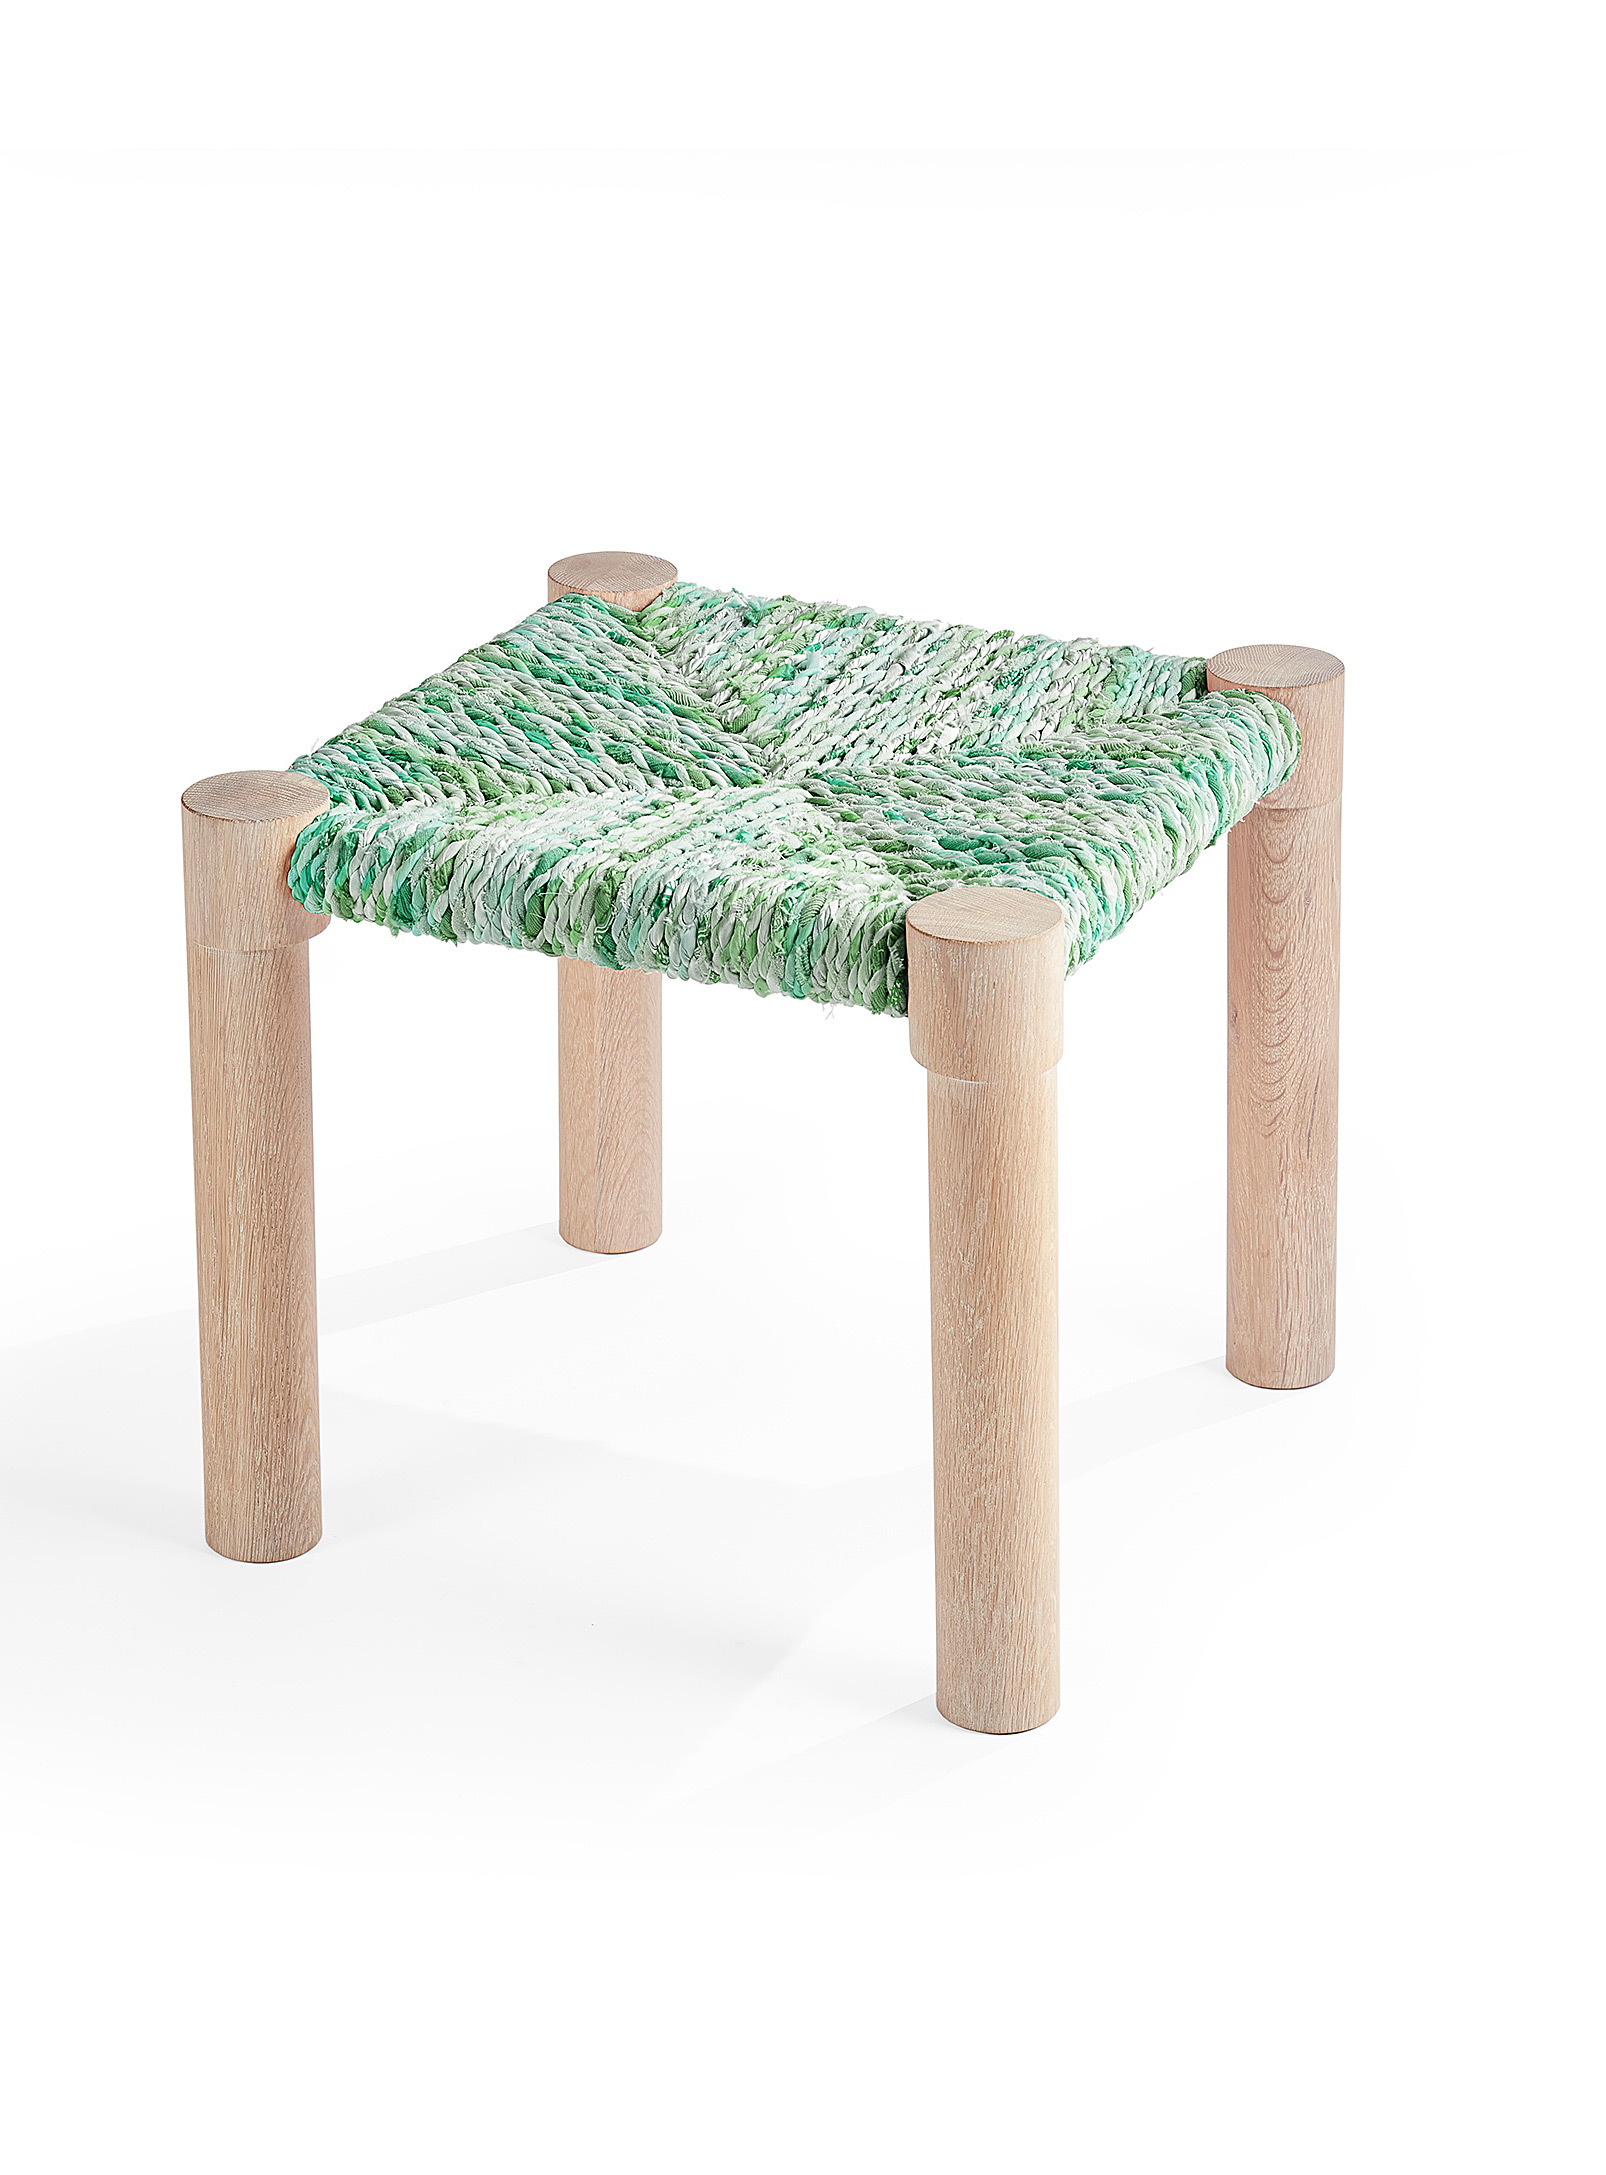 Coolican & Company Calla Stool In Mossy Green